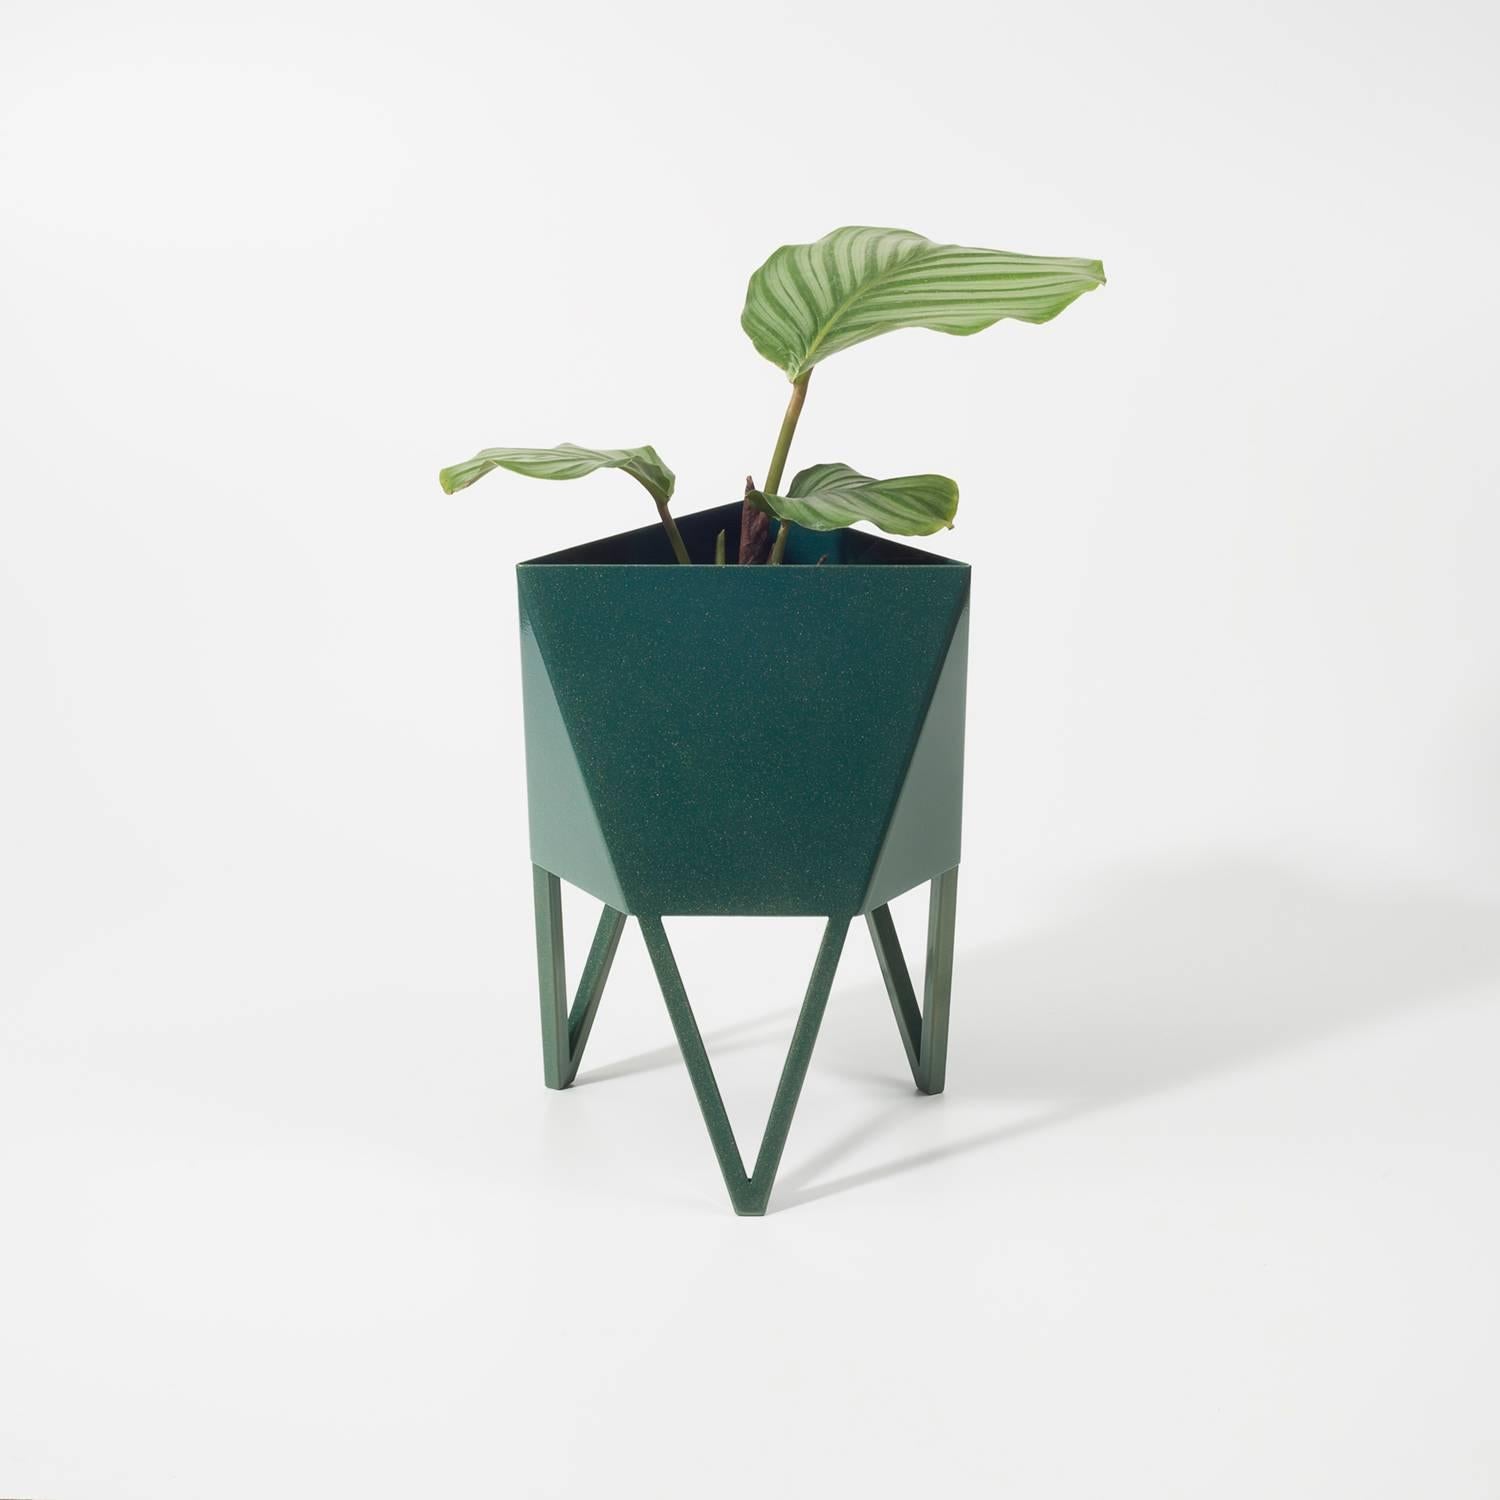 Contemporary Deca Planter, Pastel Green Steel, Small, by Force/Collide